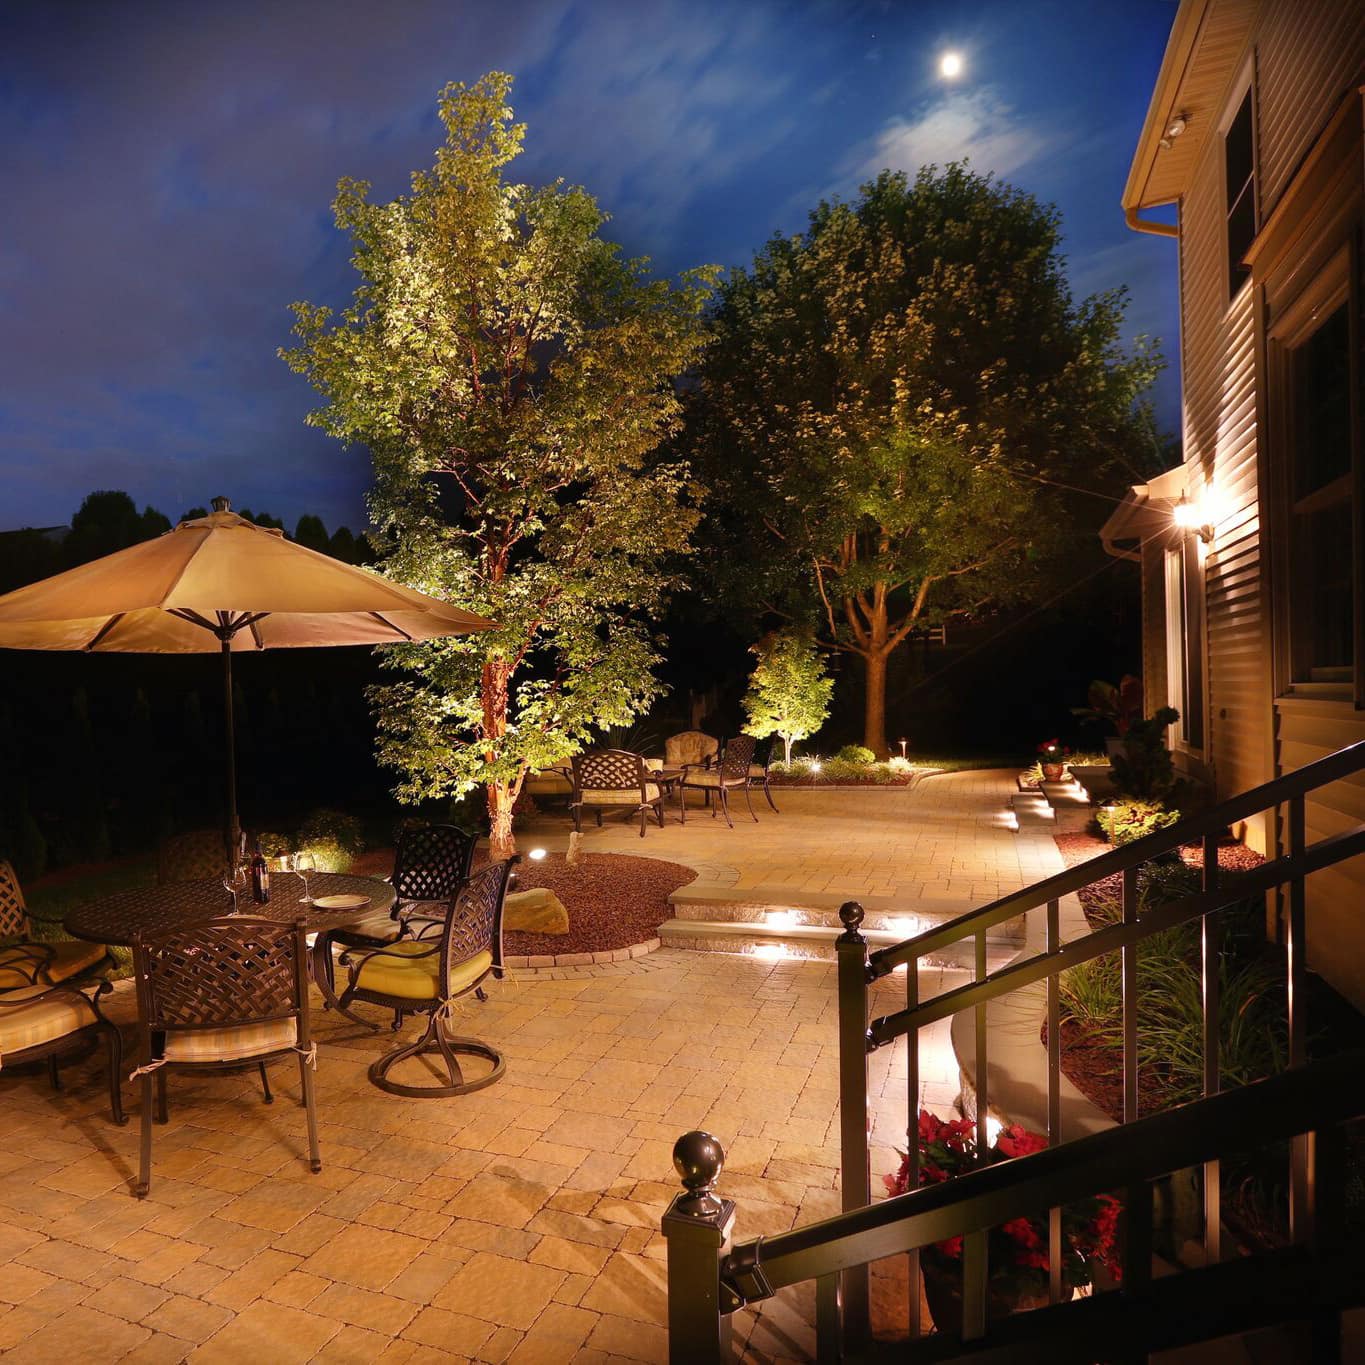 Implementing landscape and feature lighting into your landscape design is a great way to create a warm and welcoming environment once the sun sets.